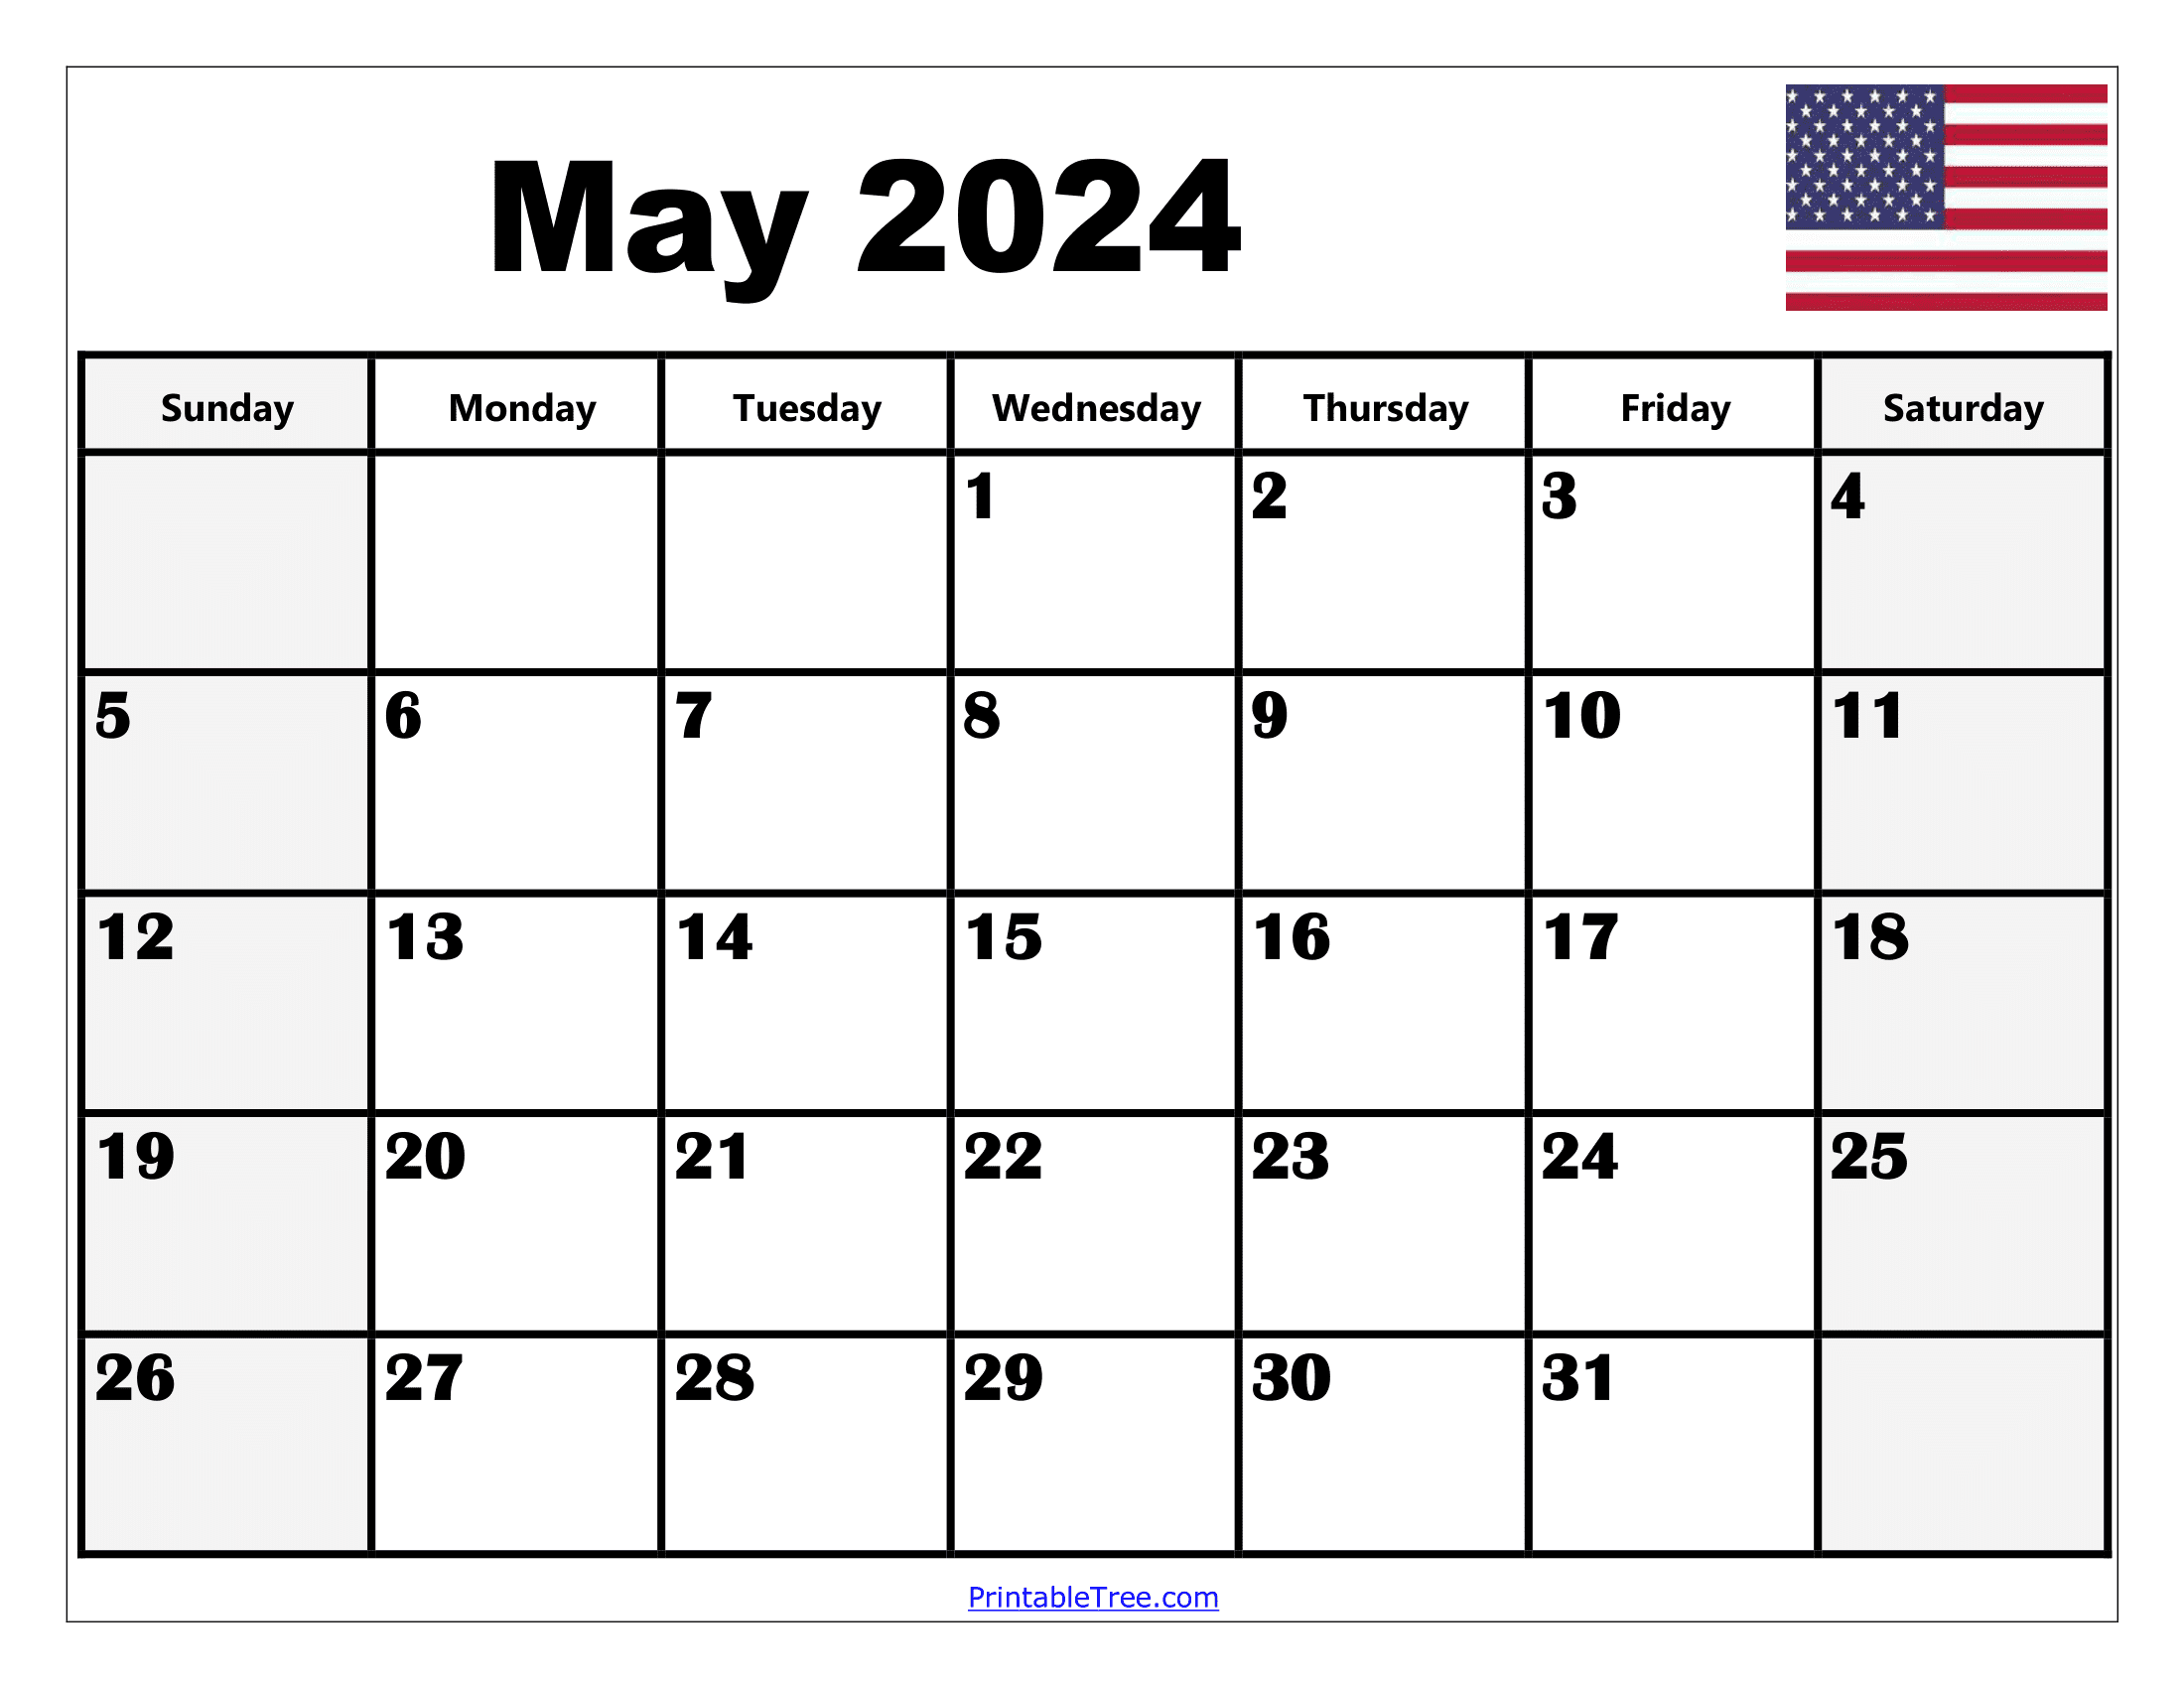 Blank May 2024 Calendar Printable Pdf Templates With Holidays for Printable Calendar 2024 May June July August